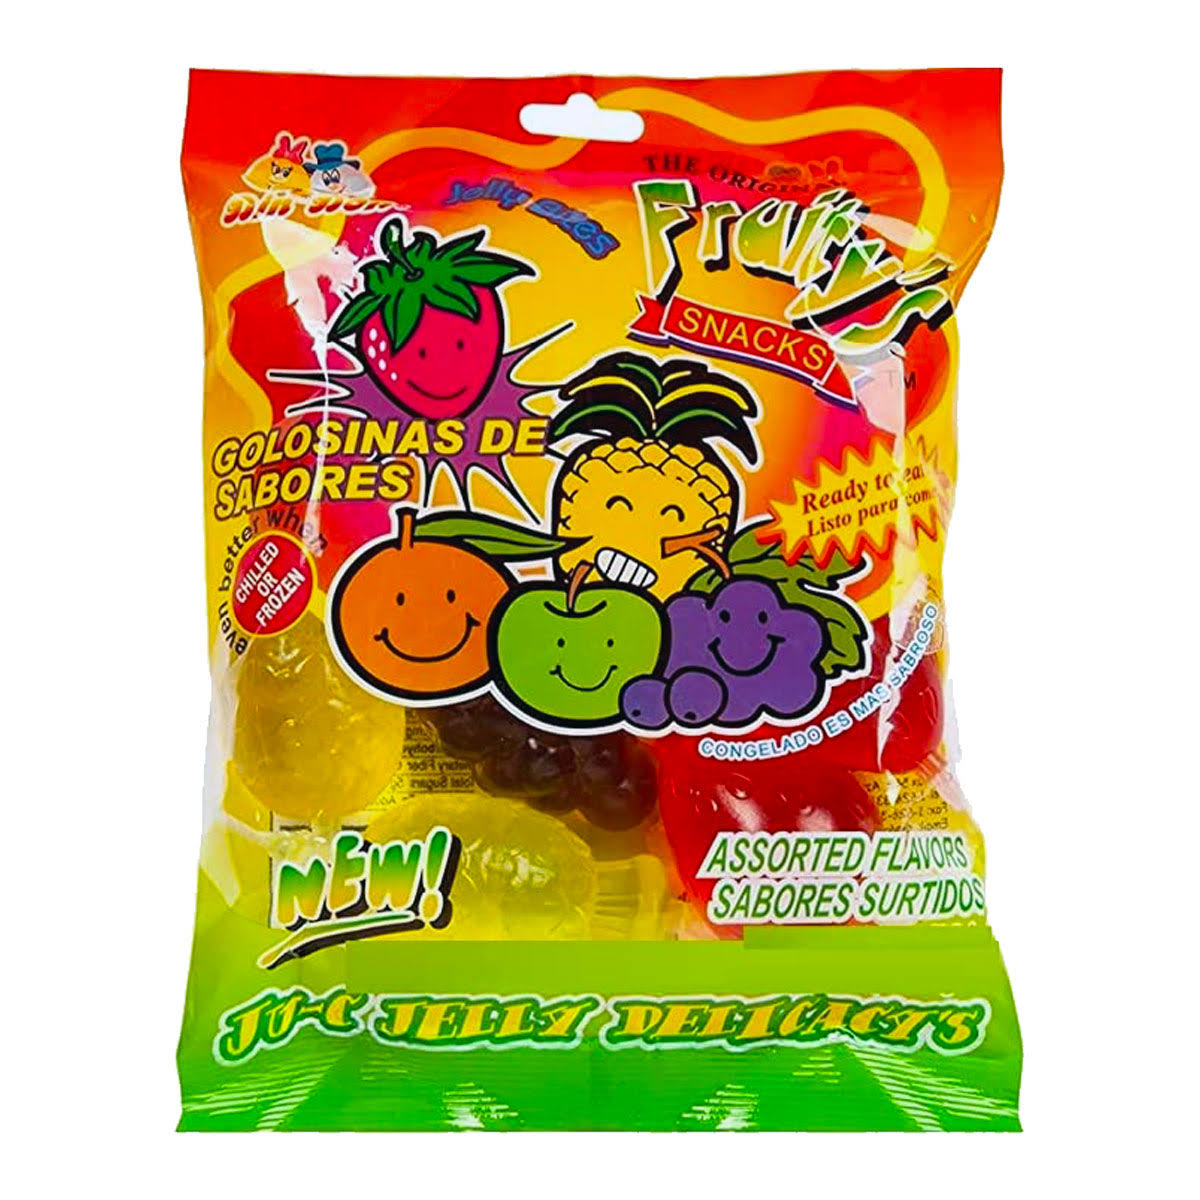 DinDon JU-C Jelly Assorted